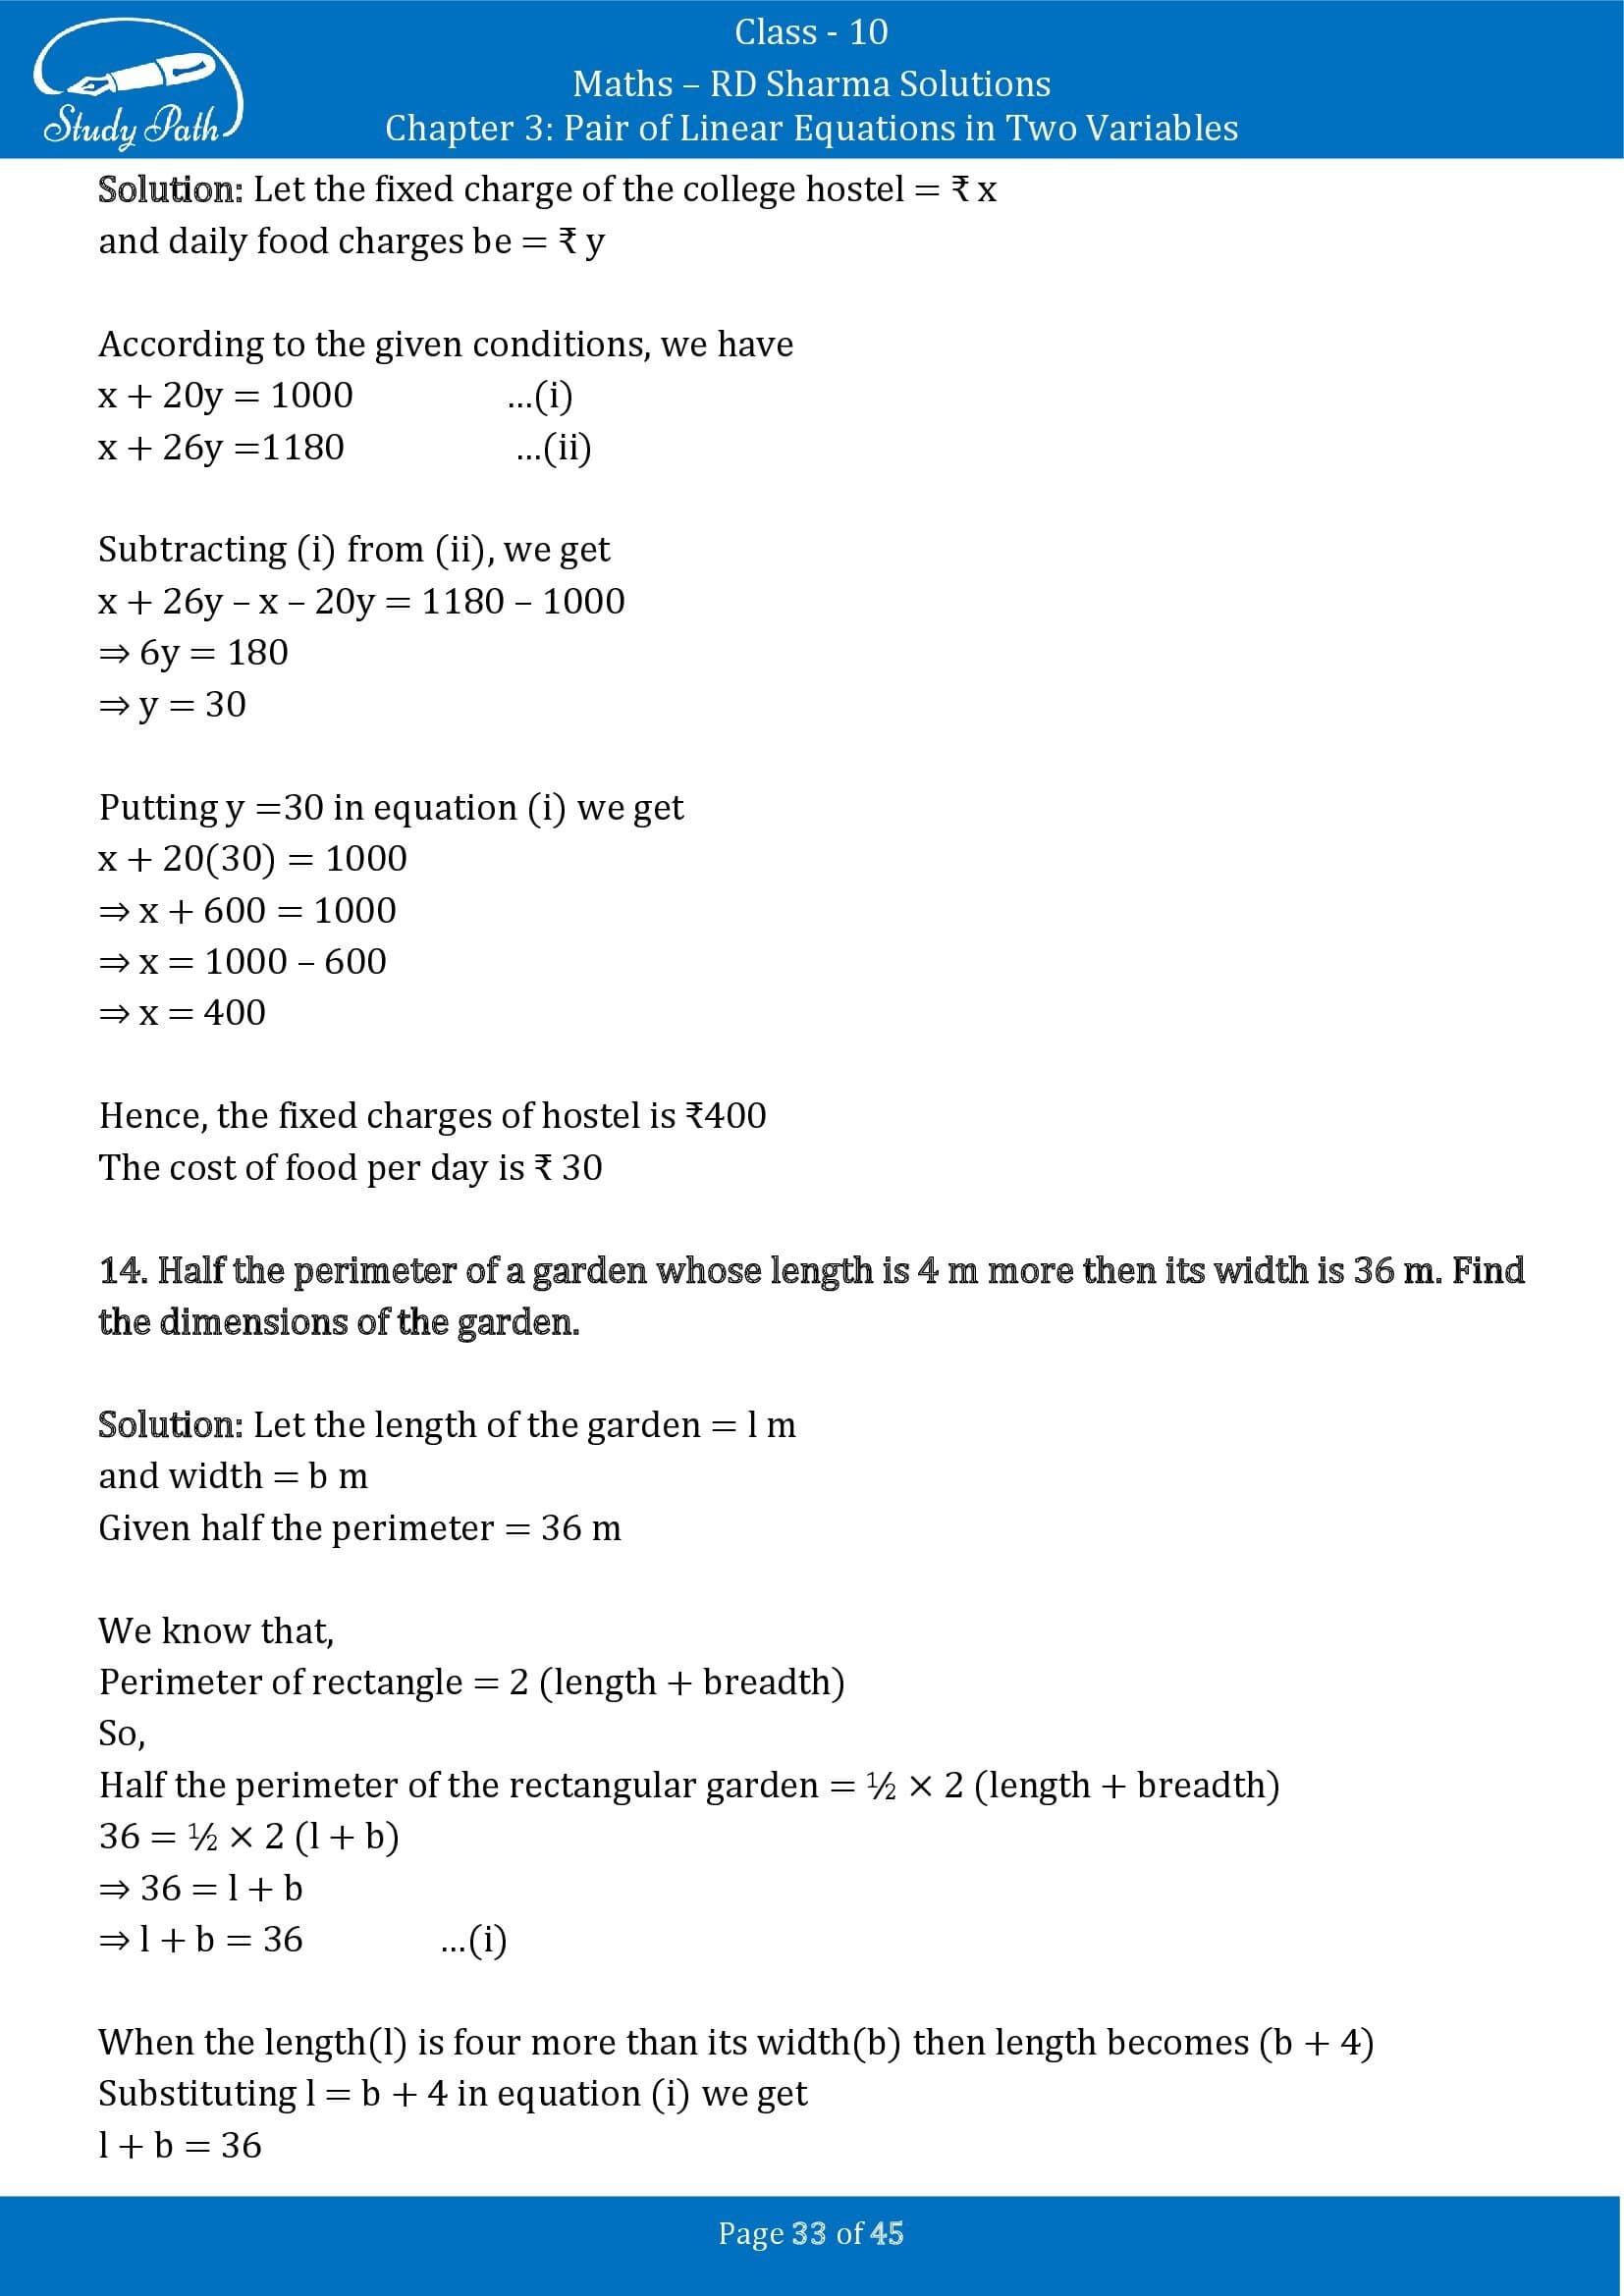 RD Sharma Solutions Class 10 Chapter 3 Pair of Linear Equations in Two Variables Exercise 3.11 00033